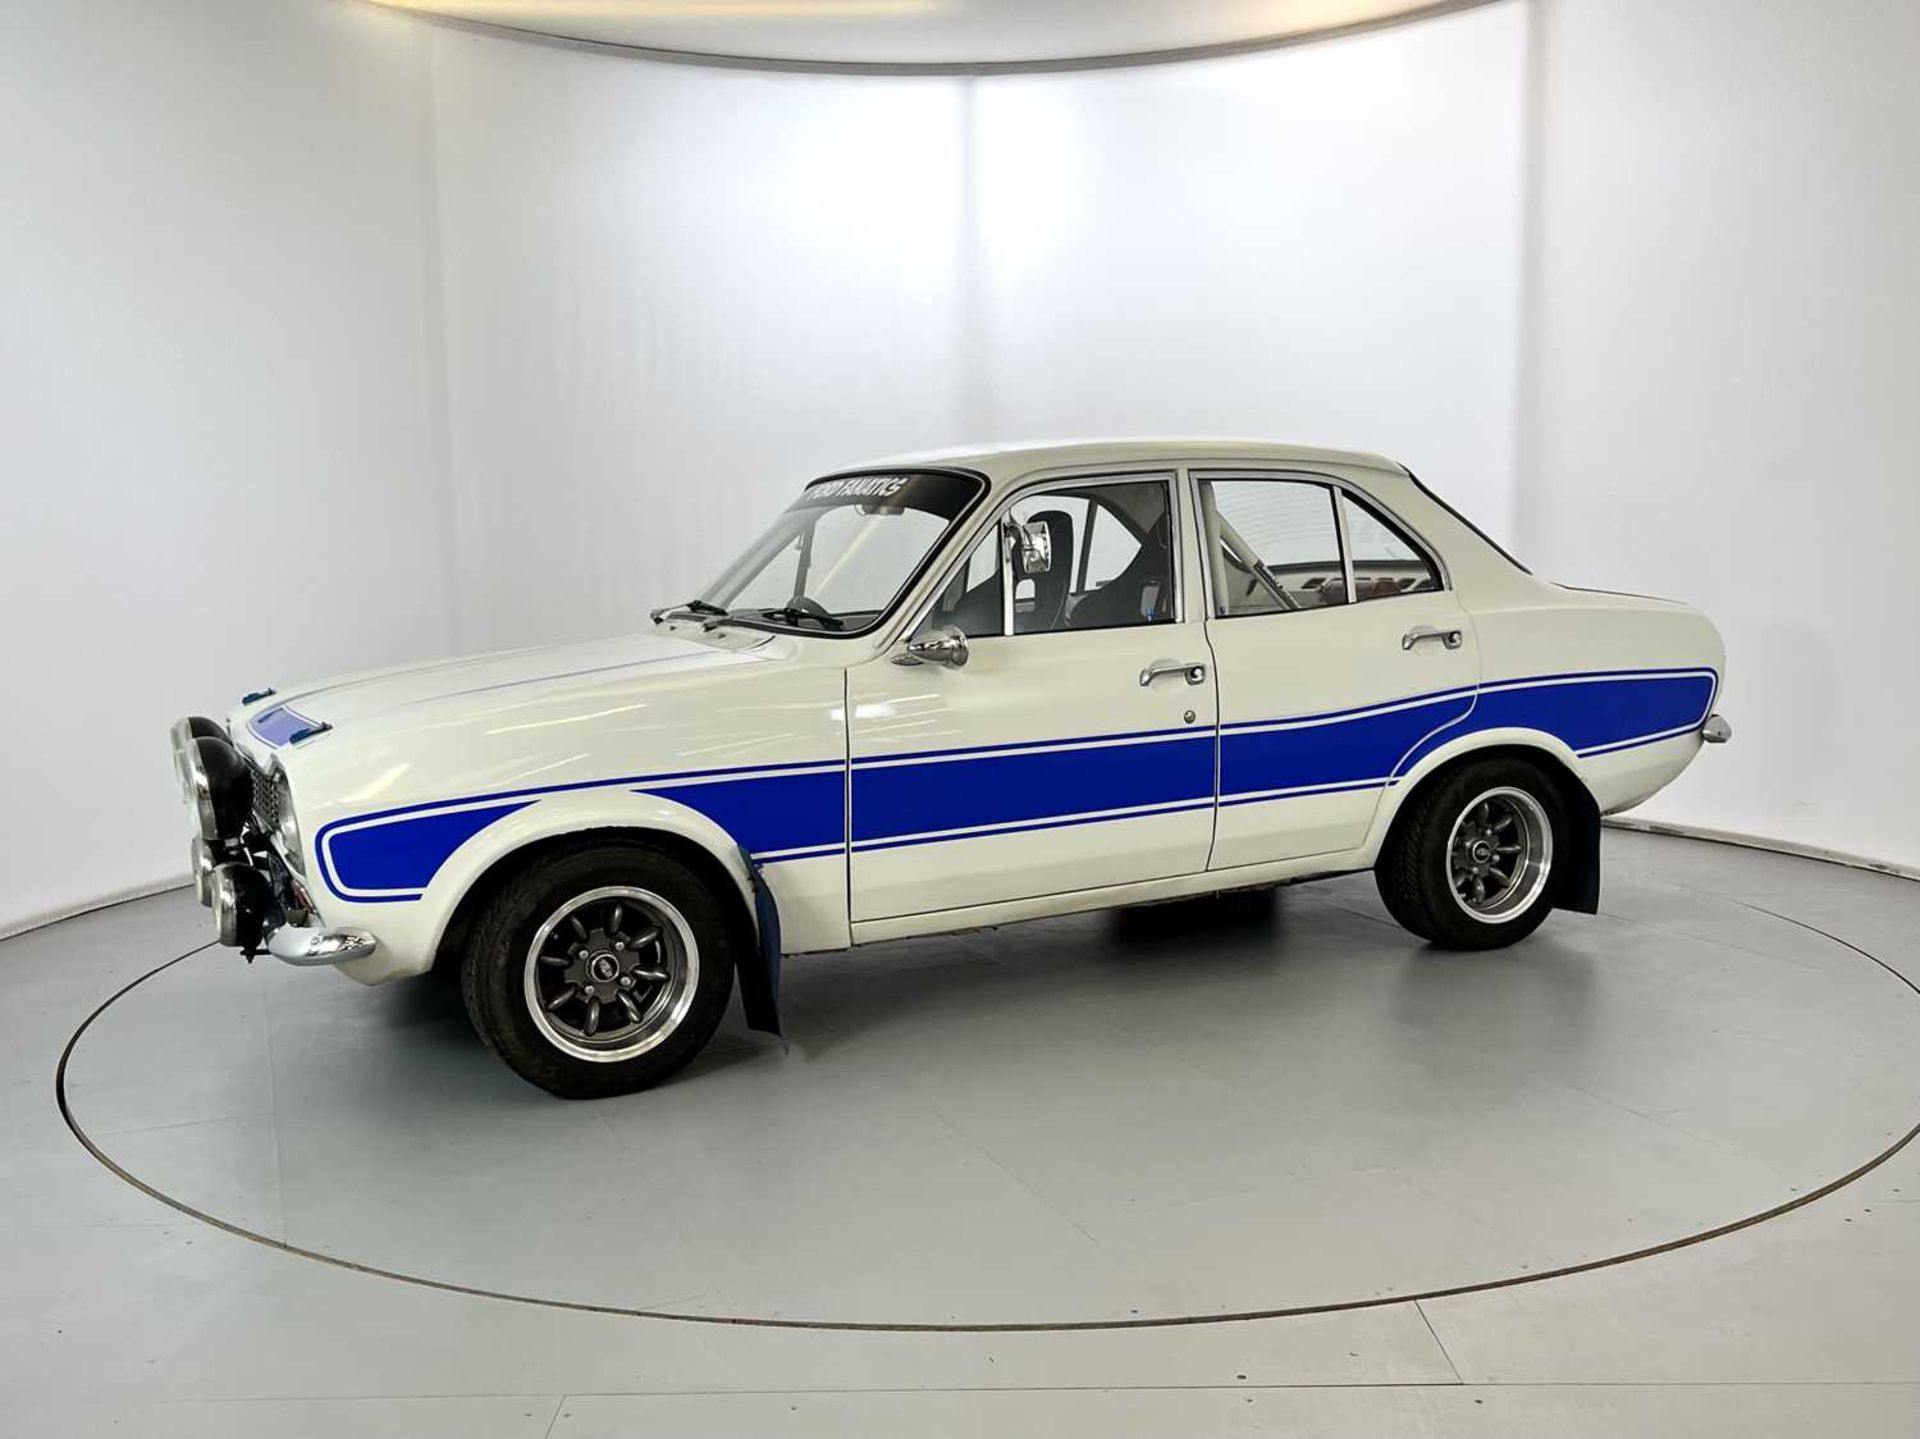 1970 Ford Escort - Image 4 of 30